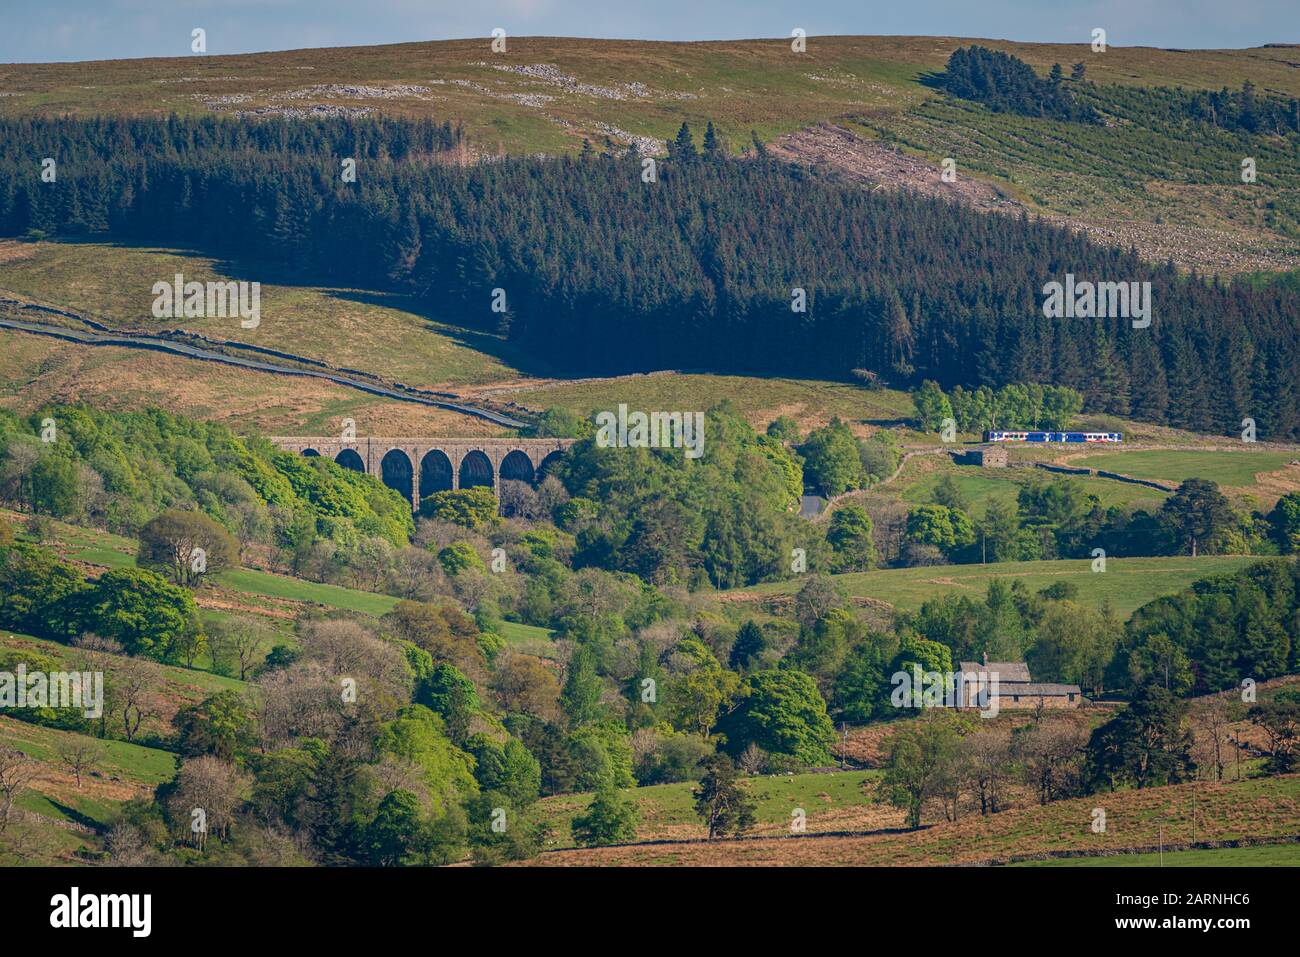 Near Cowgill, Cumbria, England, UK - May 16, 2019: A train passing the Dent Head Viaduct on the Settle-Carlisle Railway line Stock Photo